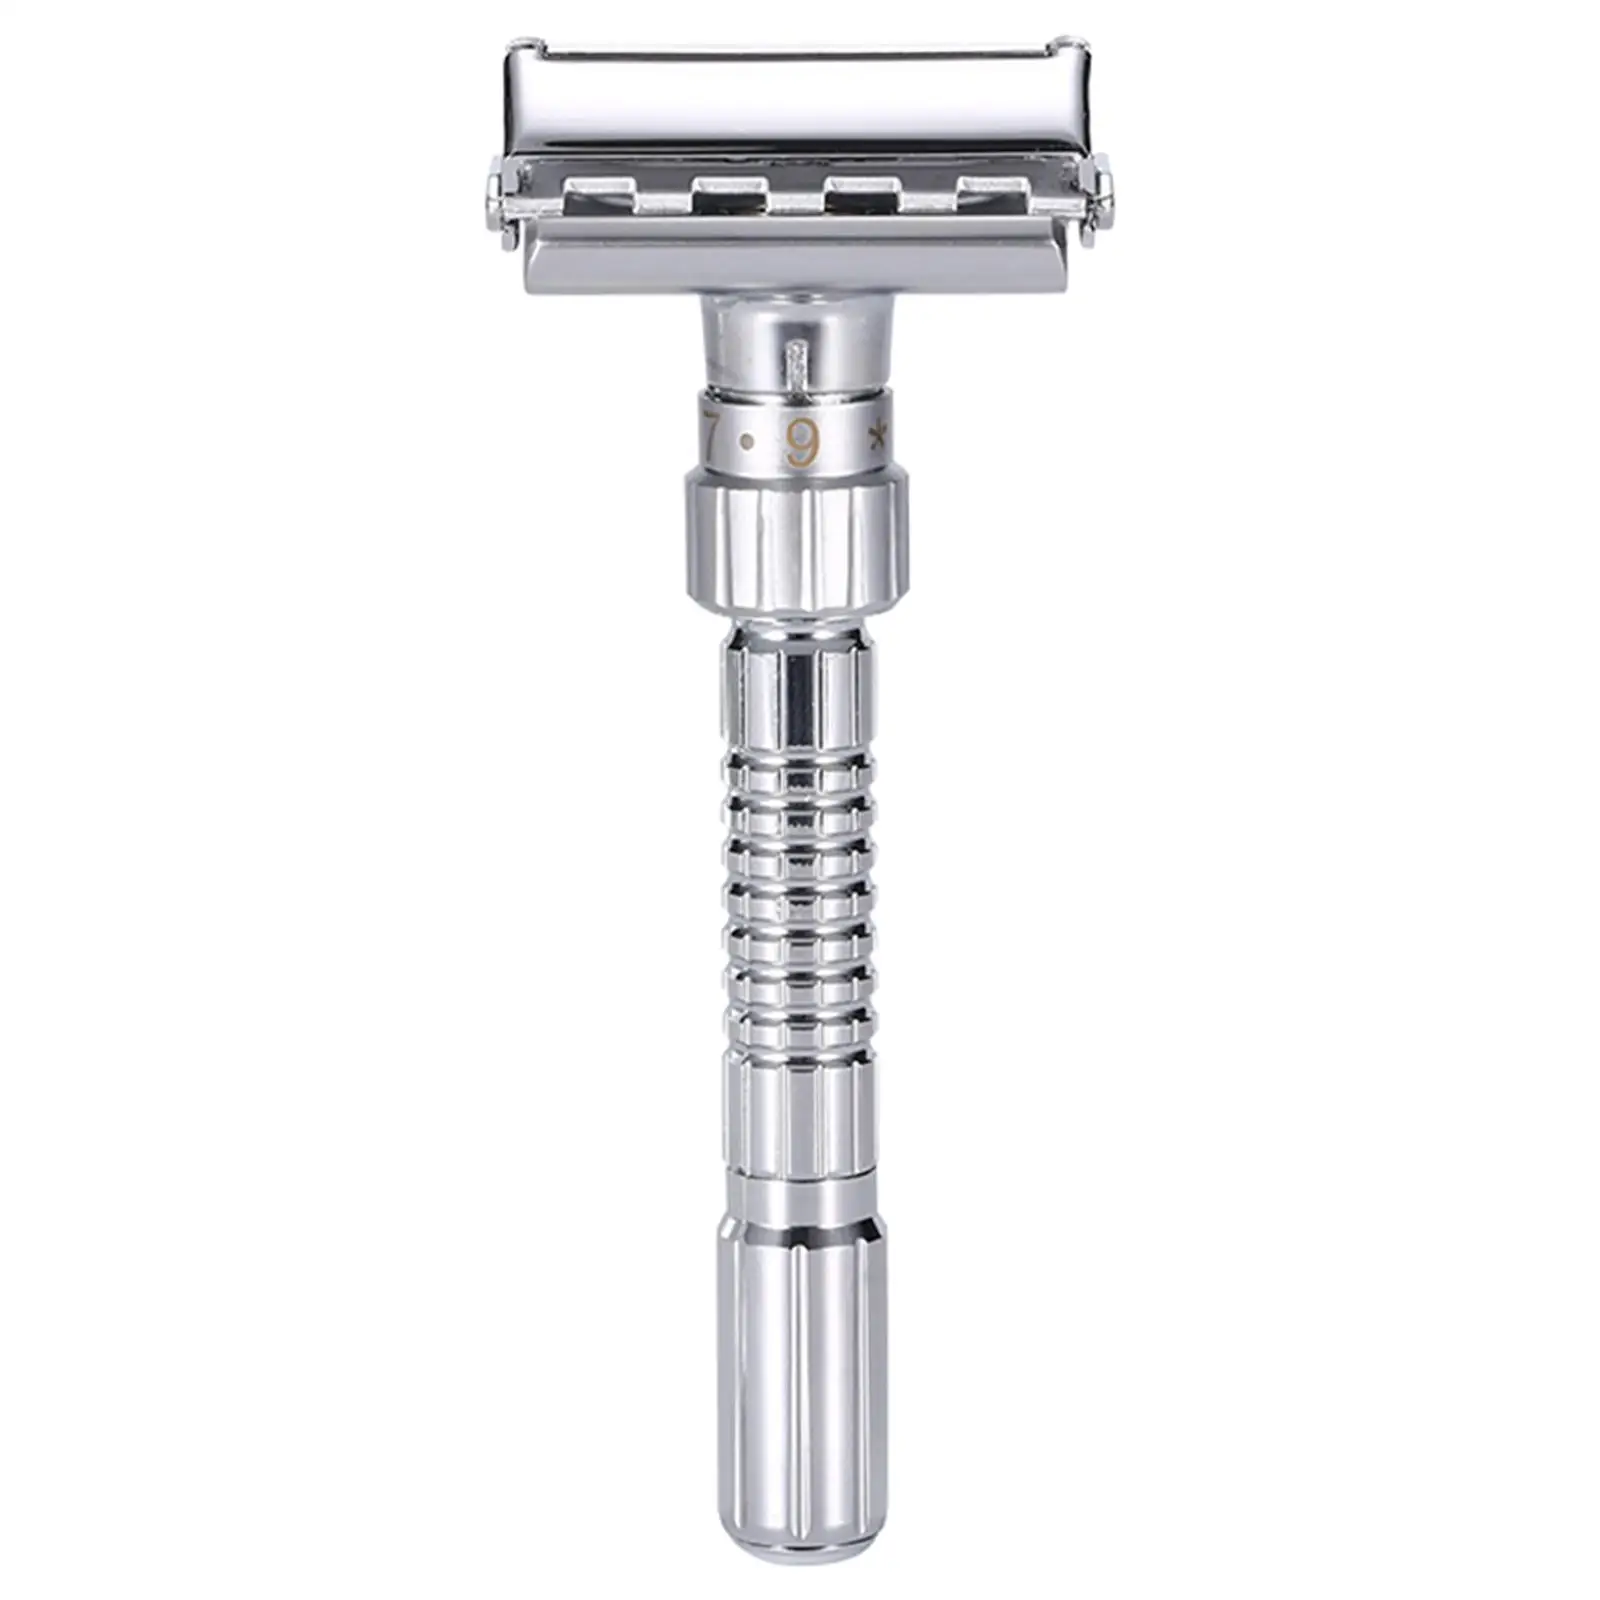 Manual Safety with 5 Zinc Alloy Reusable Shaver, Safety Shaving Everyday Use, Travel Men